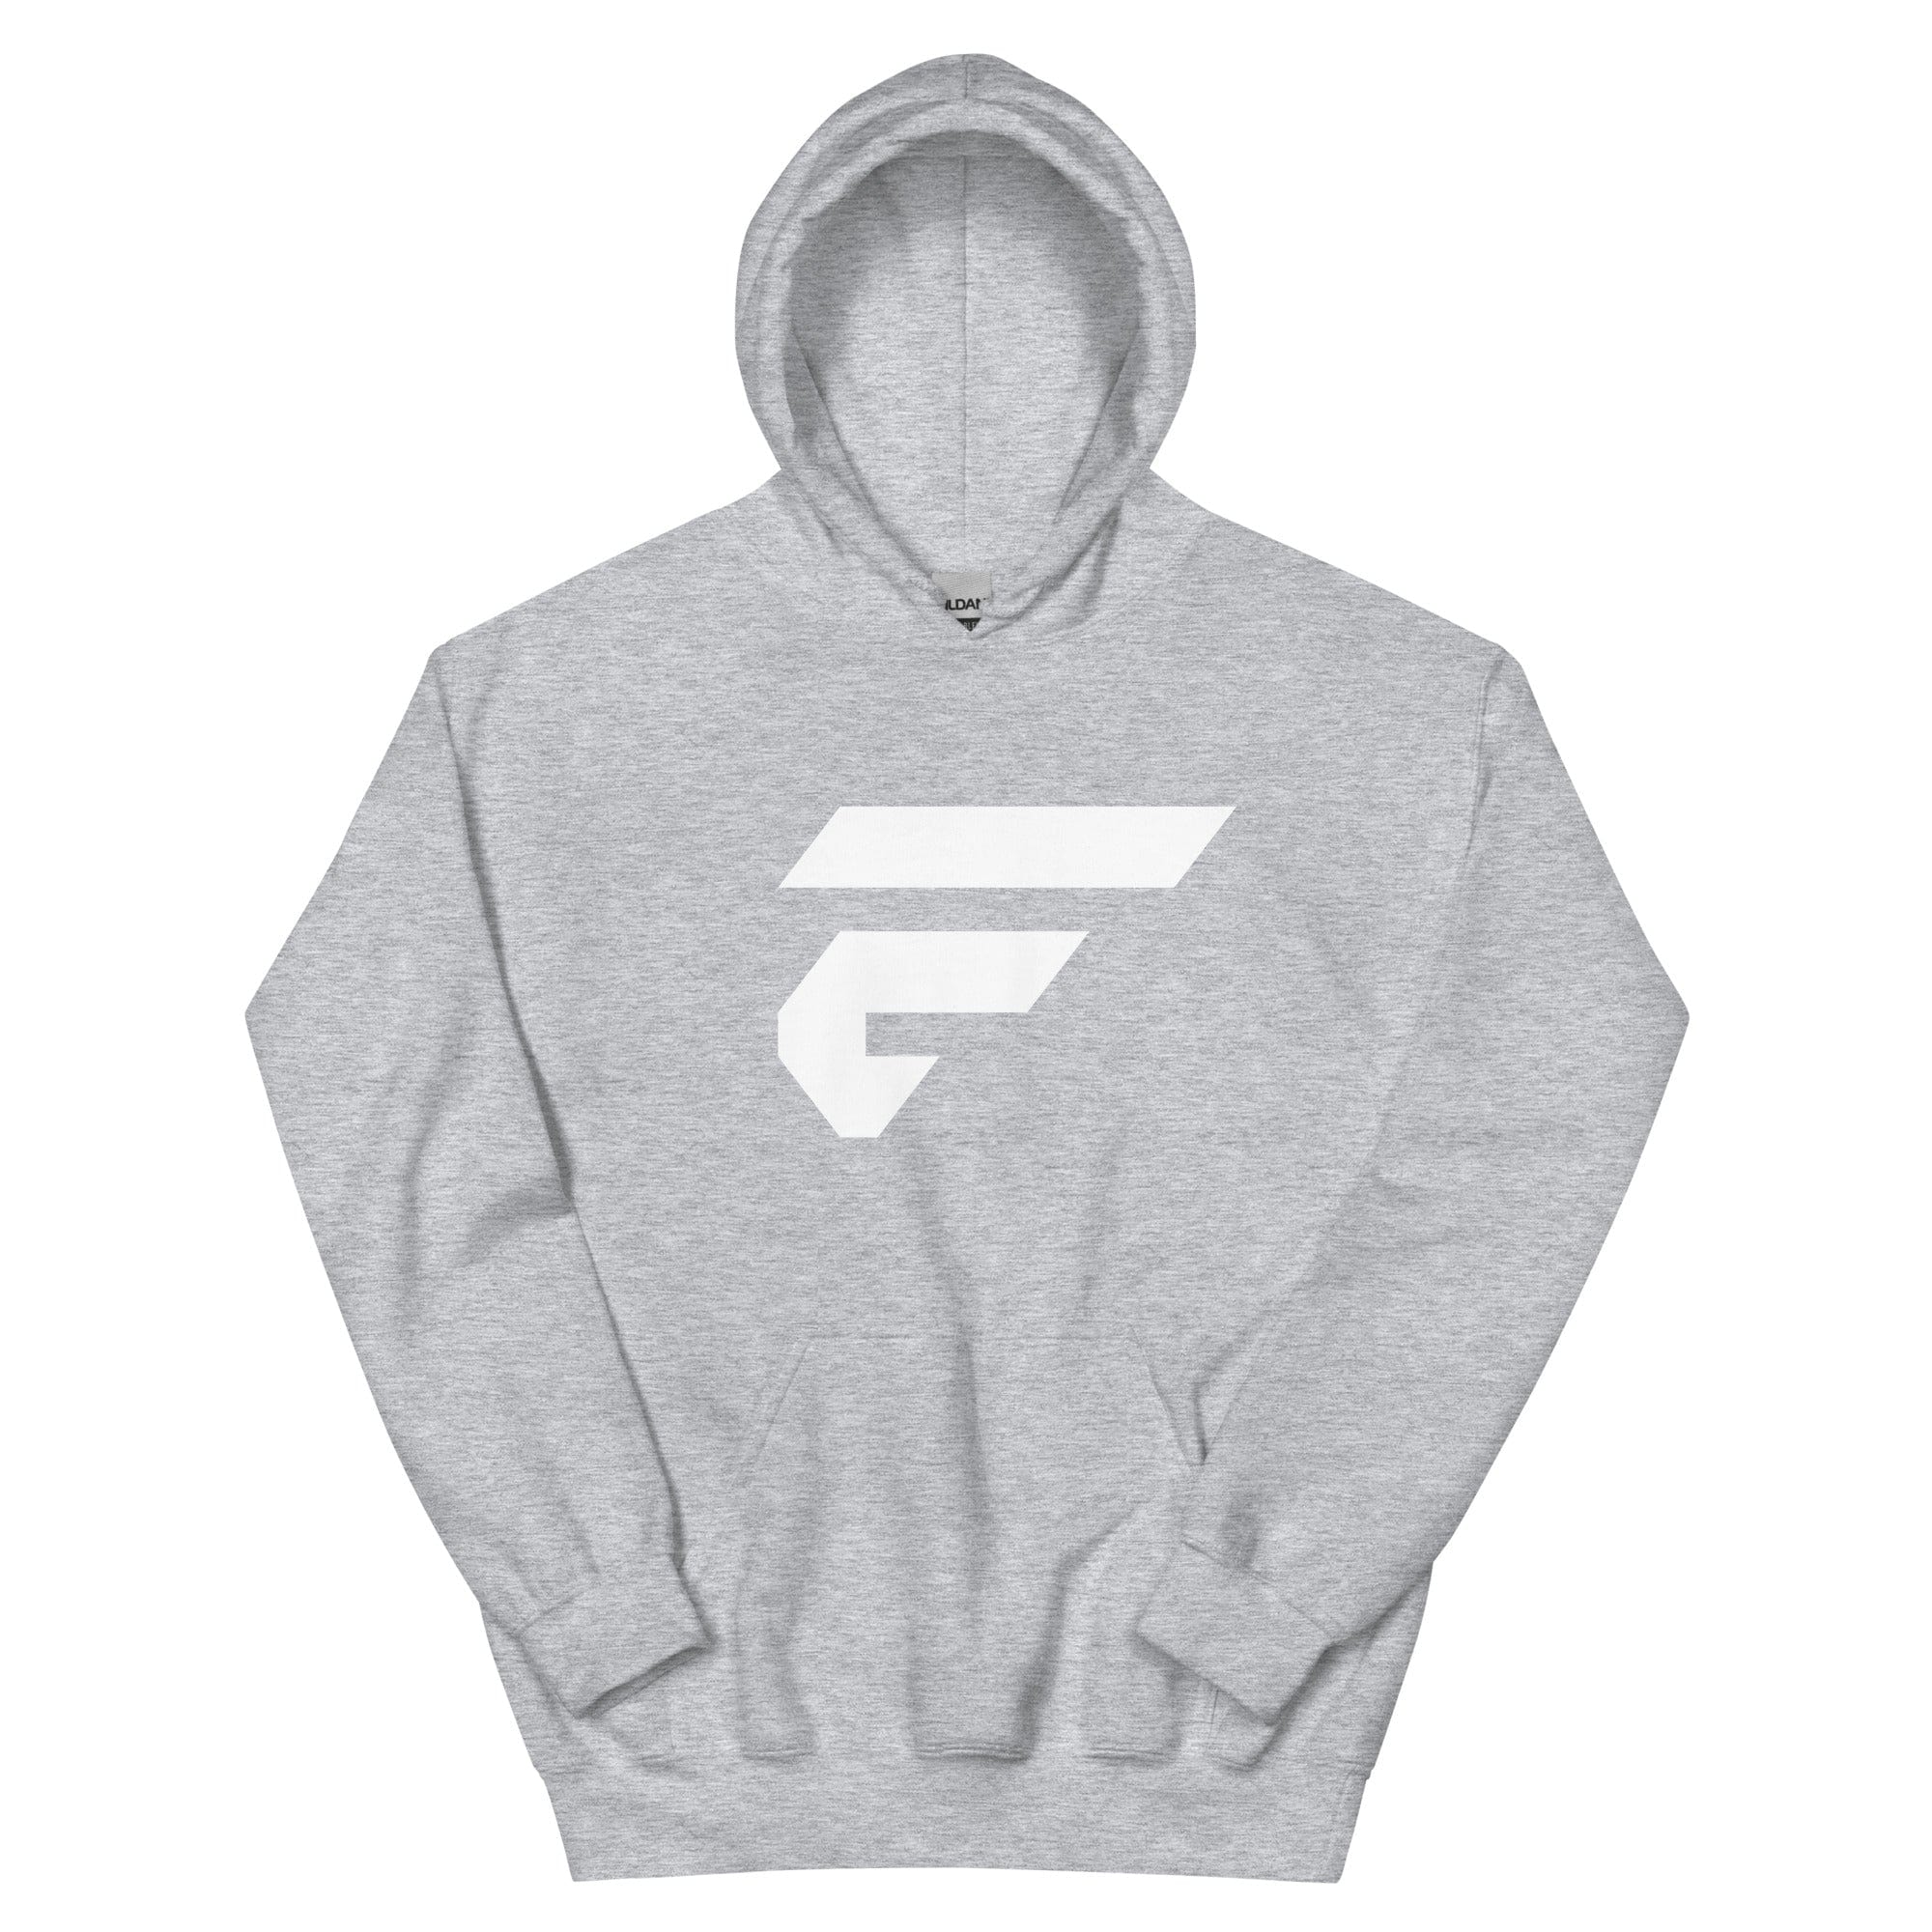 Heathered grey unisex cotton hoodie with Fire Cornhole F logo in white